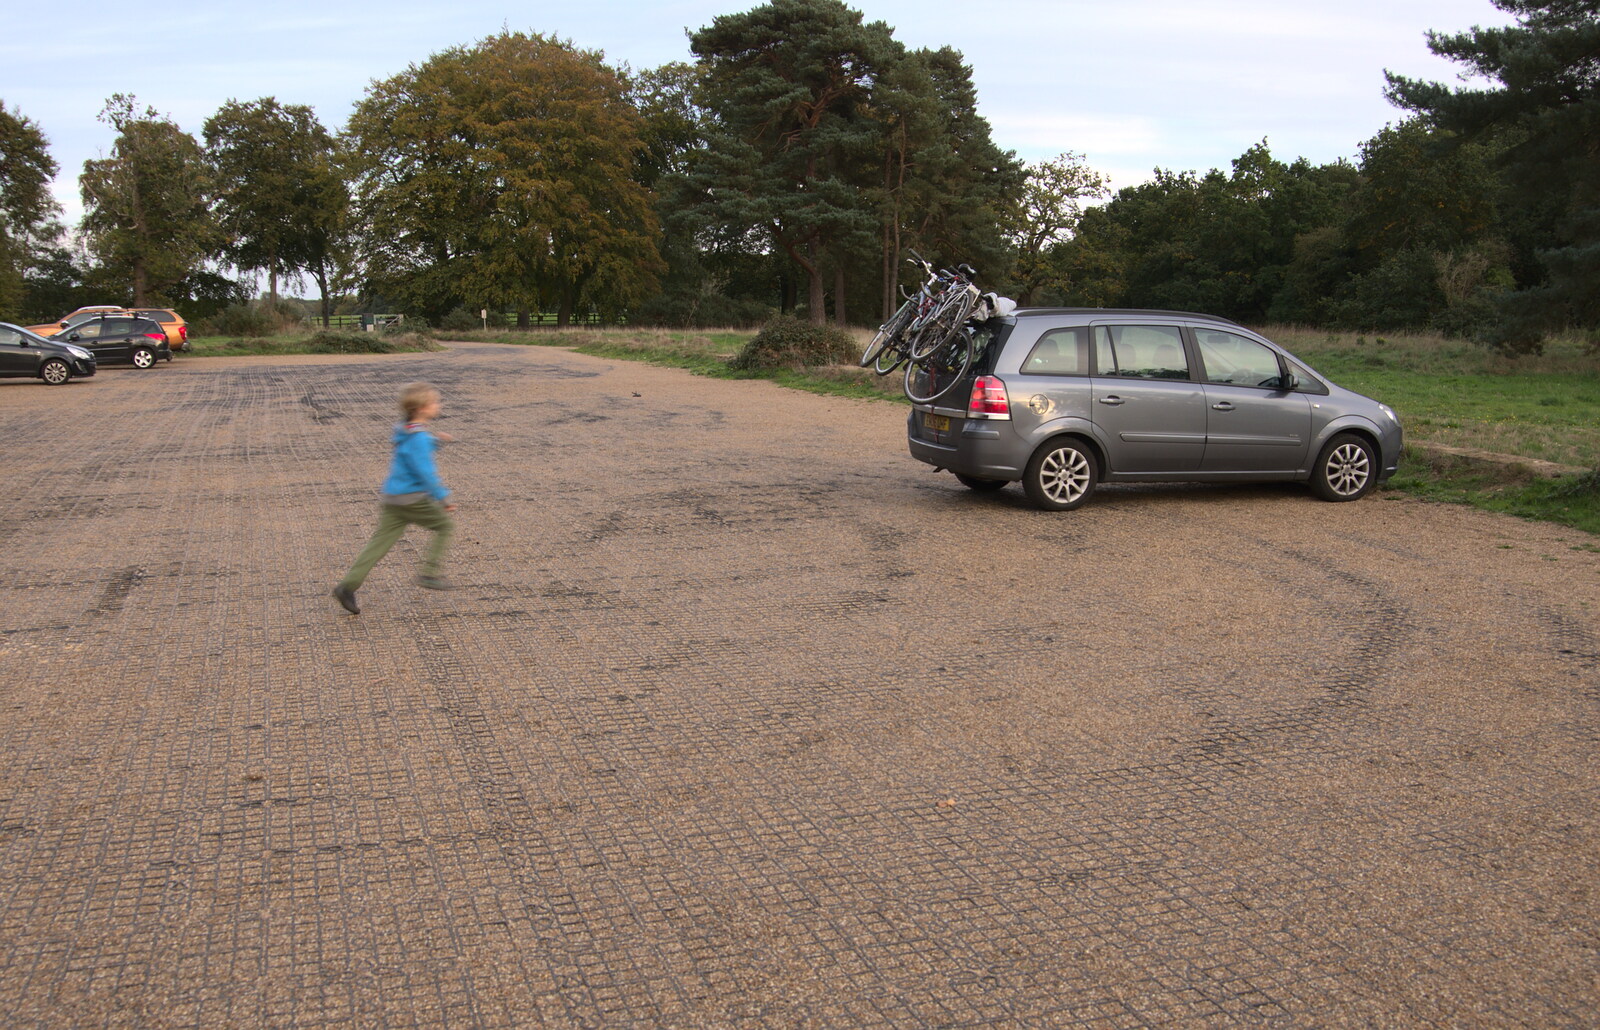 Harry legs it to the car from Evidence of Autumn: Geocaching on Knettishall Heath, Suffolk - 7th October 2018